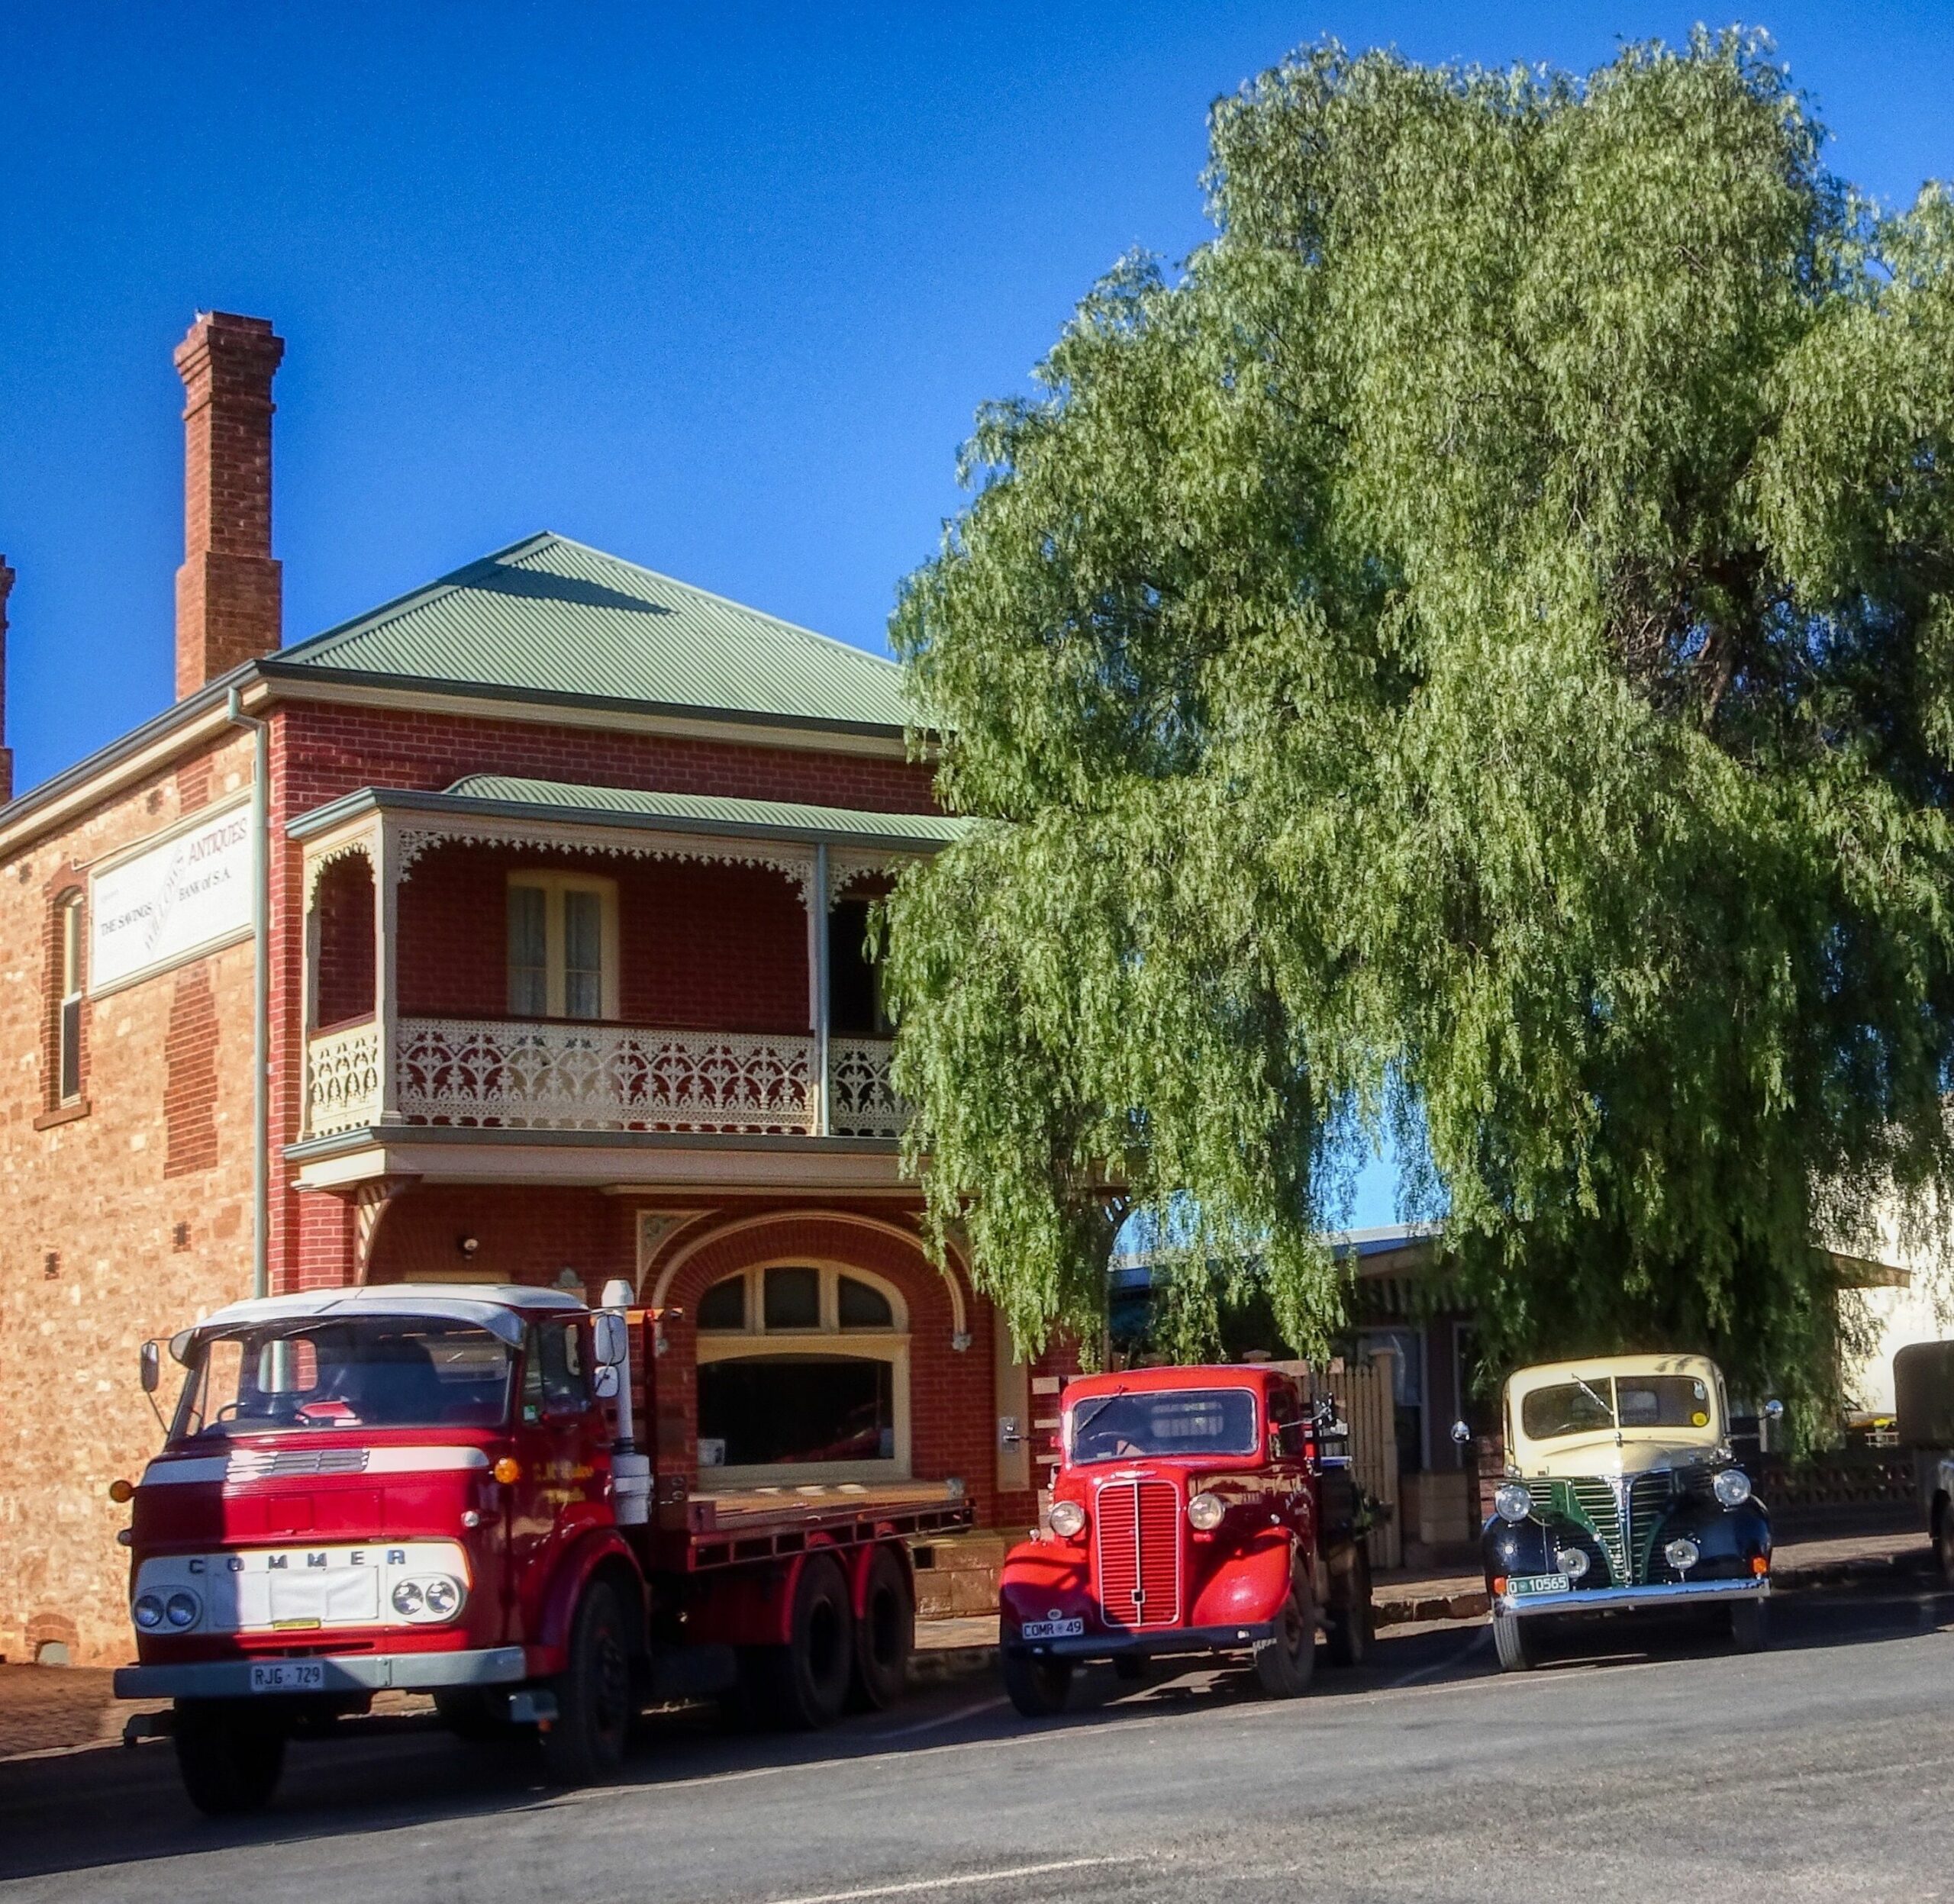 Savings Bank of South Australia - Old Quorn Branch